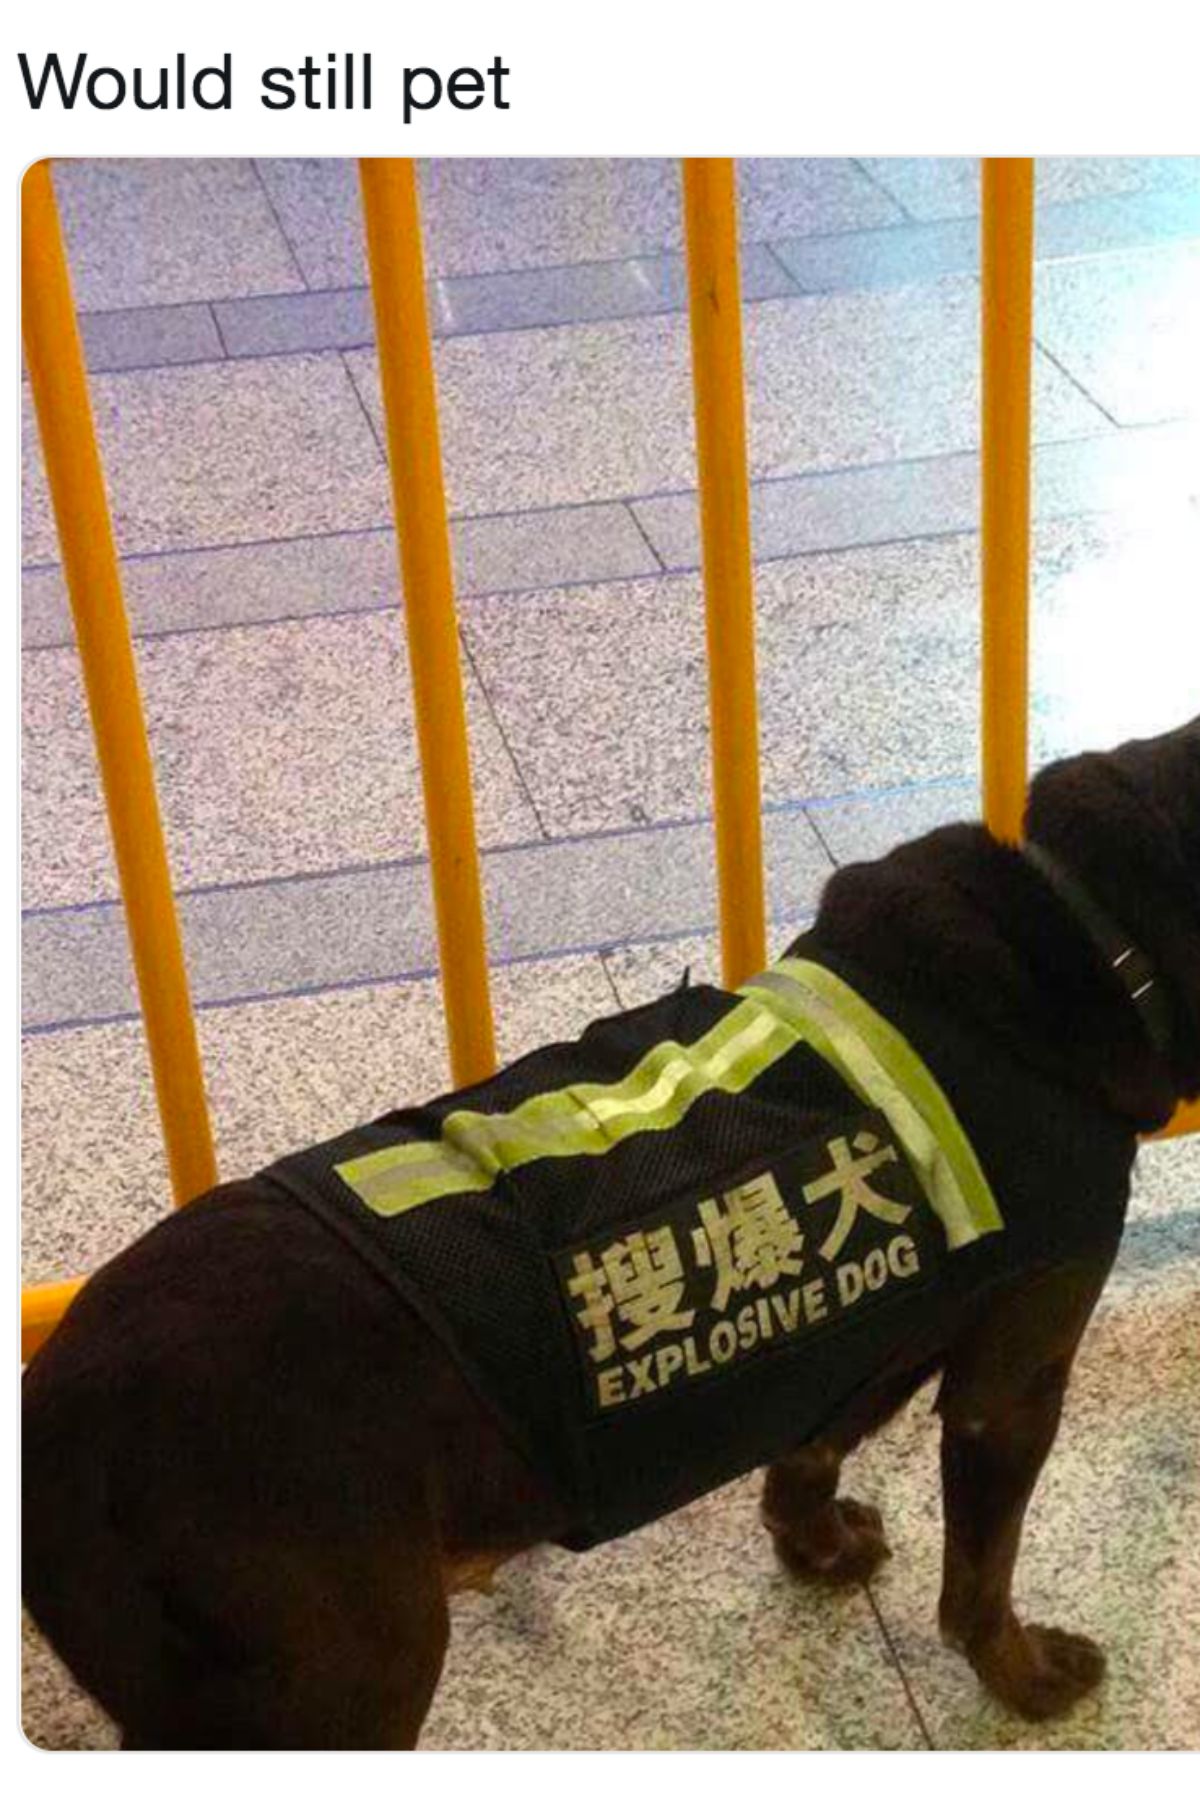 black dog wearing a black and yellow vest saying explosive dog in english and chinese with caption saying would still pet